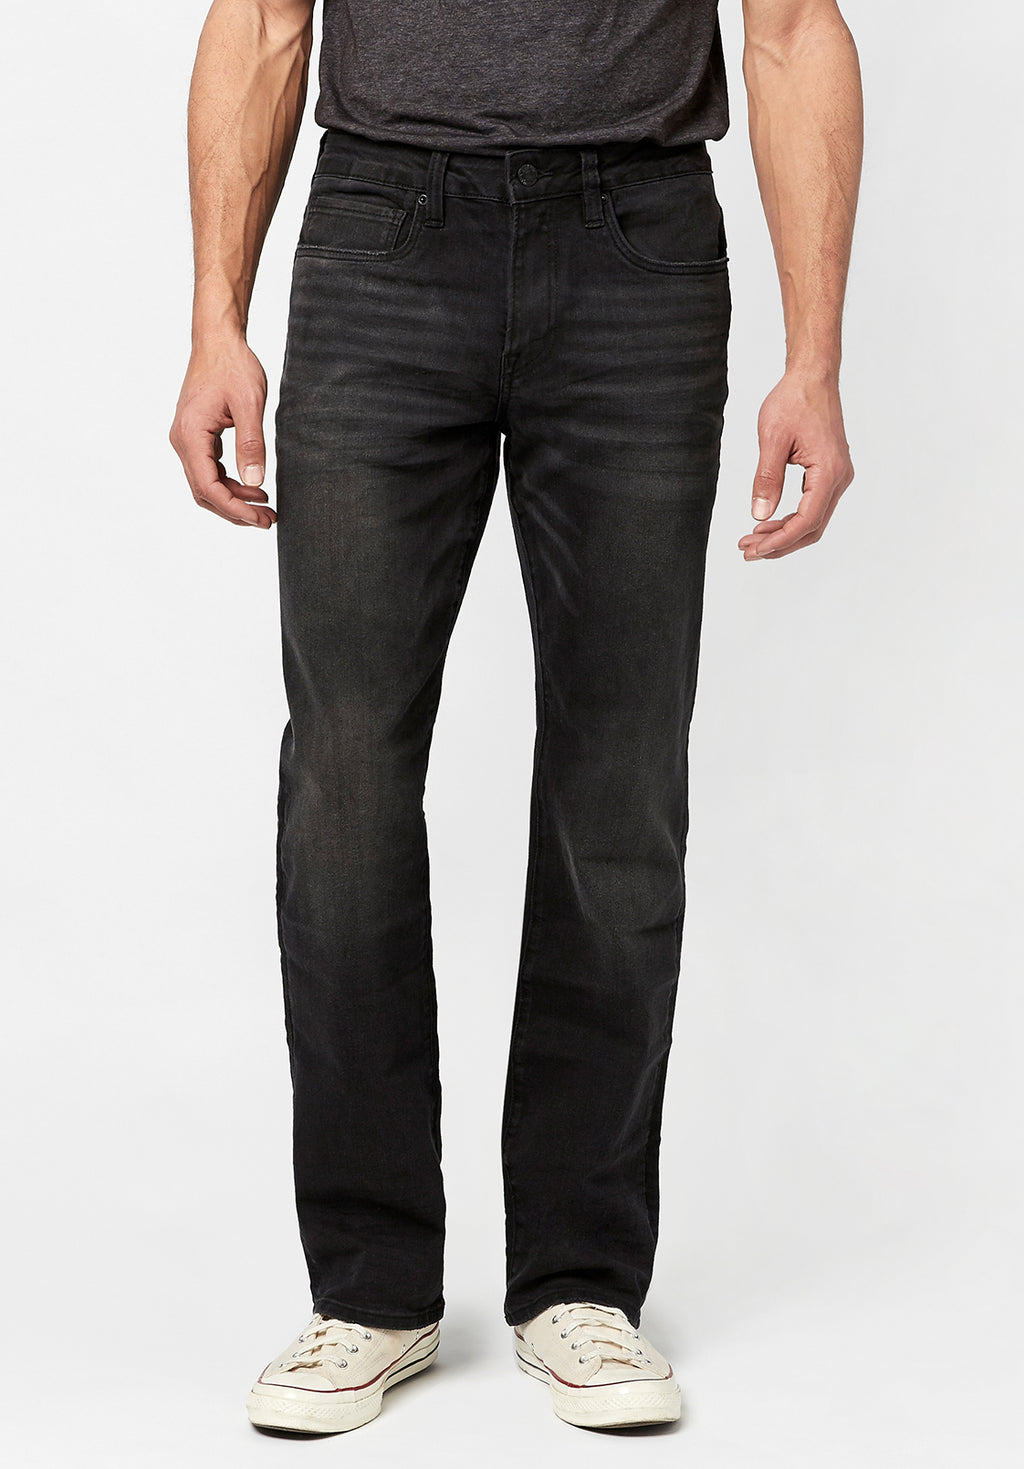 Relaxed Straight Driven Men's Jeans in Black Wash – Buffalo Jeans CA